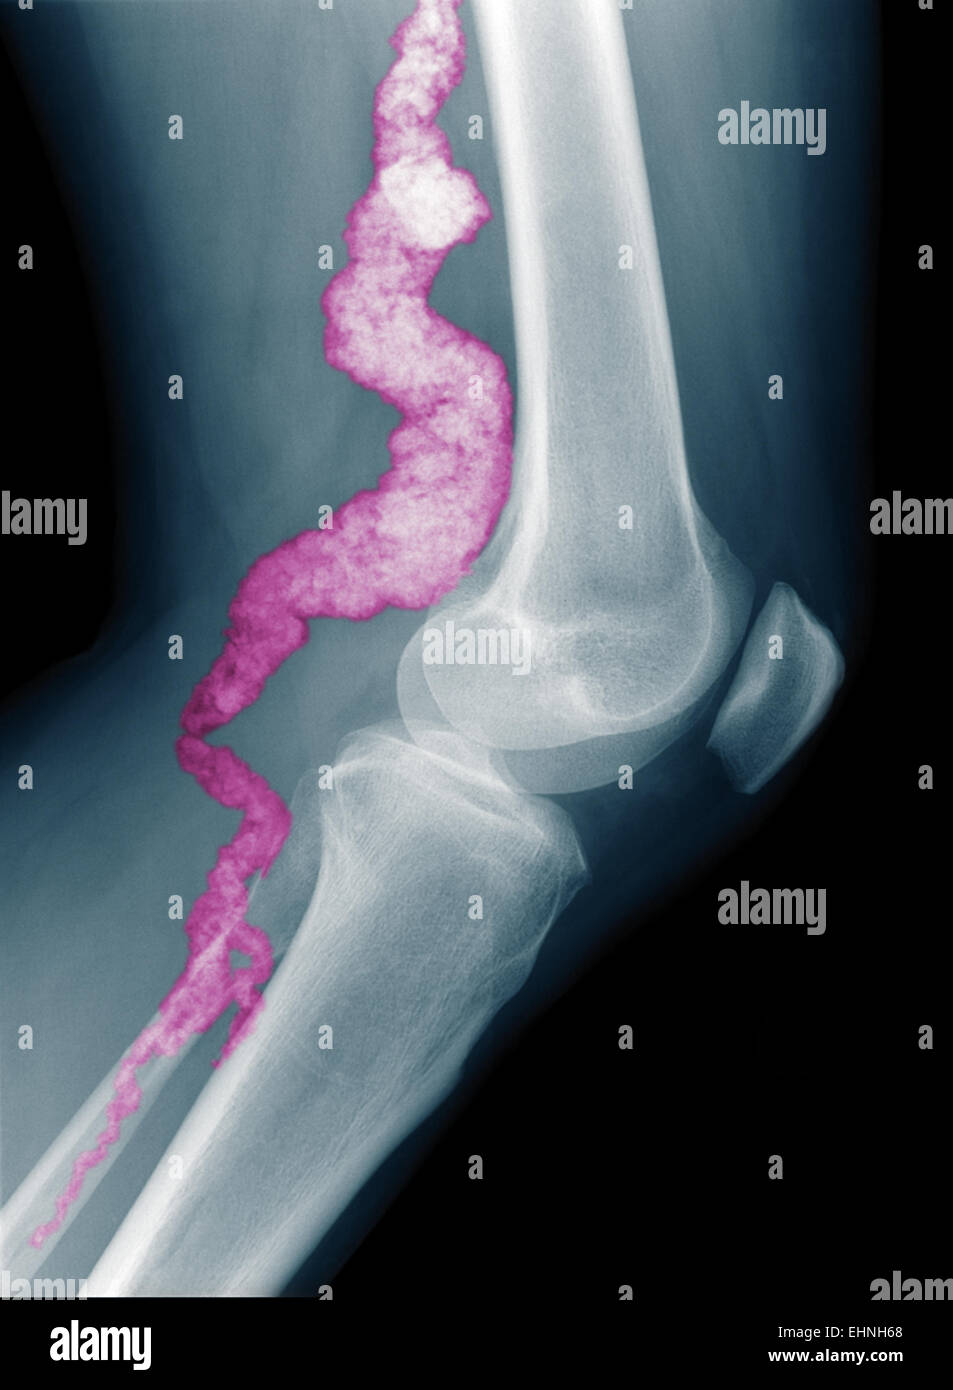 A knee x-ray of a patient with ACDC, a rare calcification disorder, reveals calcification in the main artery supplying blood to the lower leg. Stock Photo